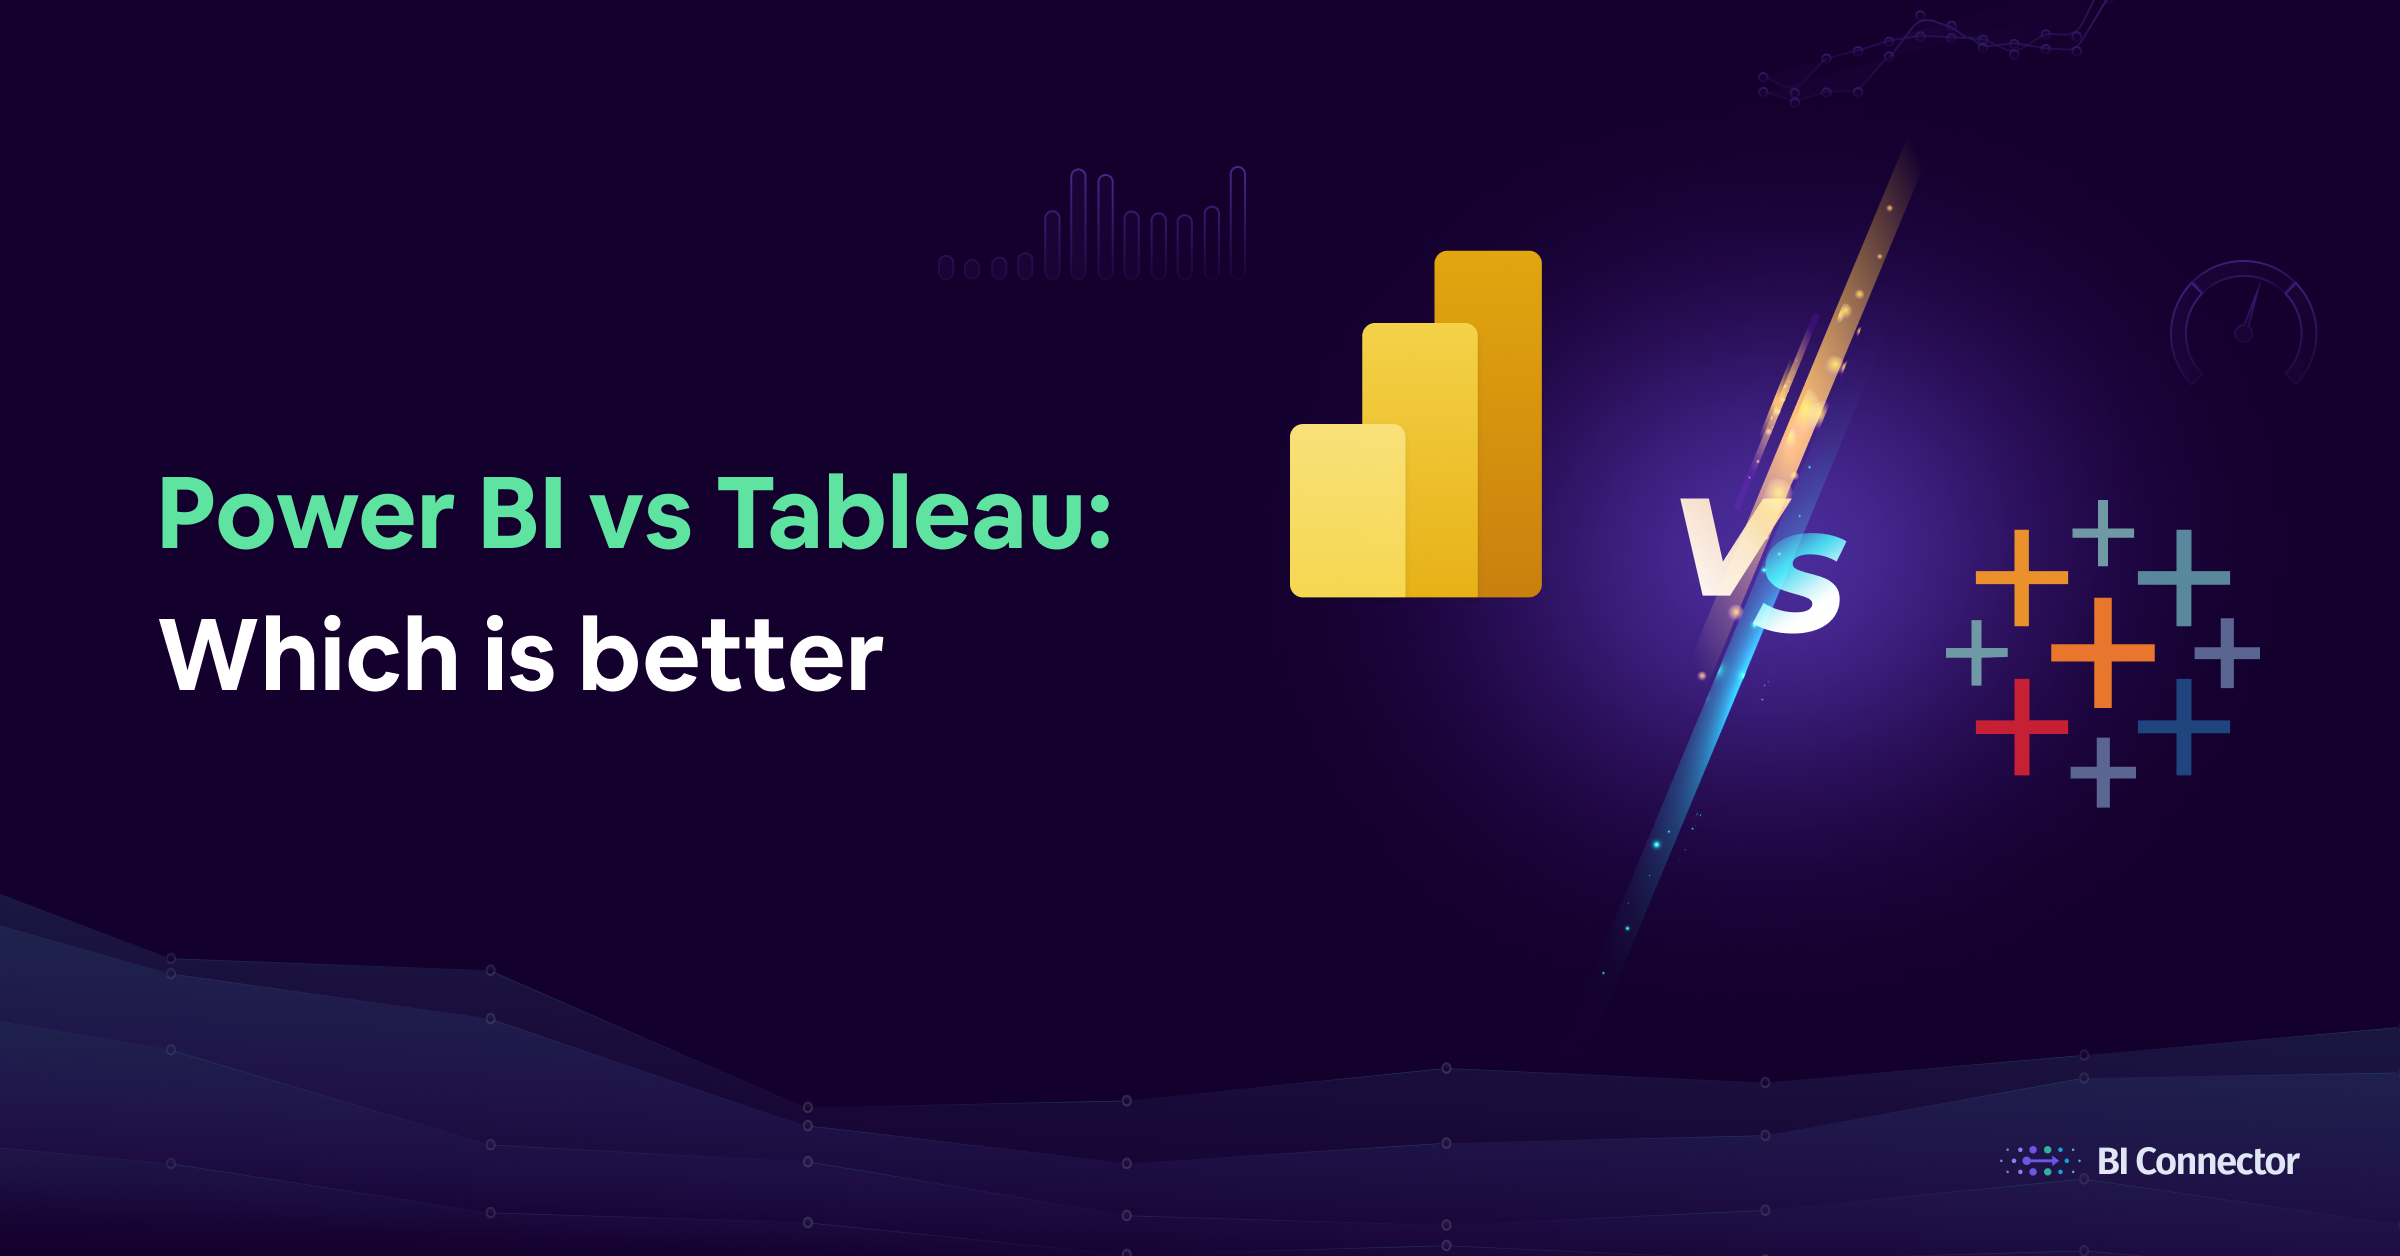 Tableau Game Zone • Tabloide